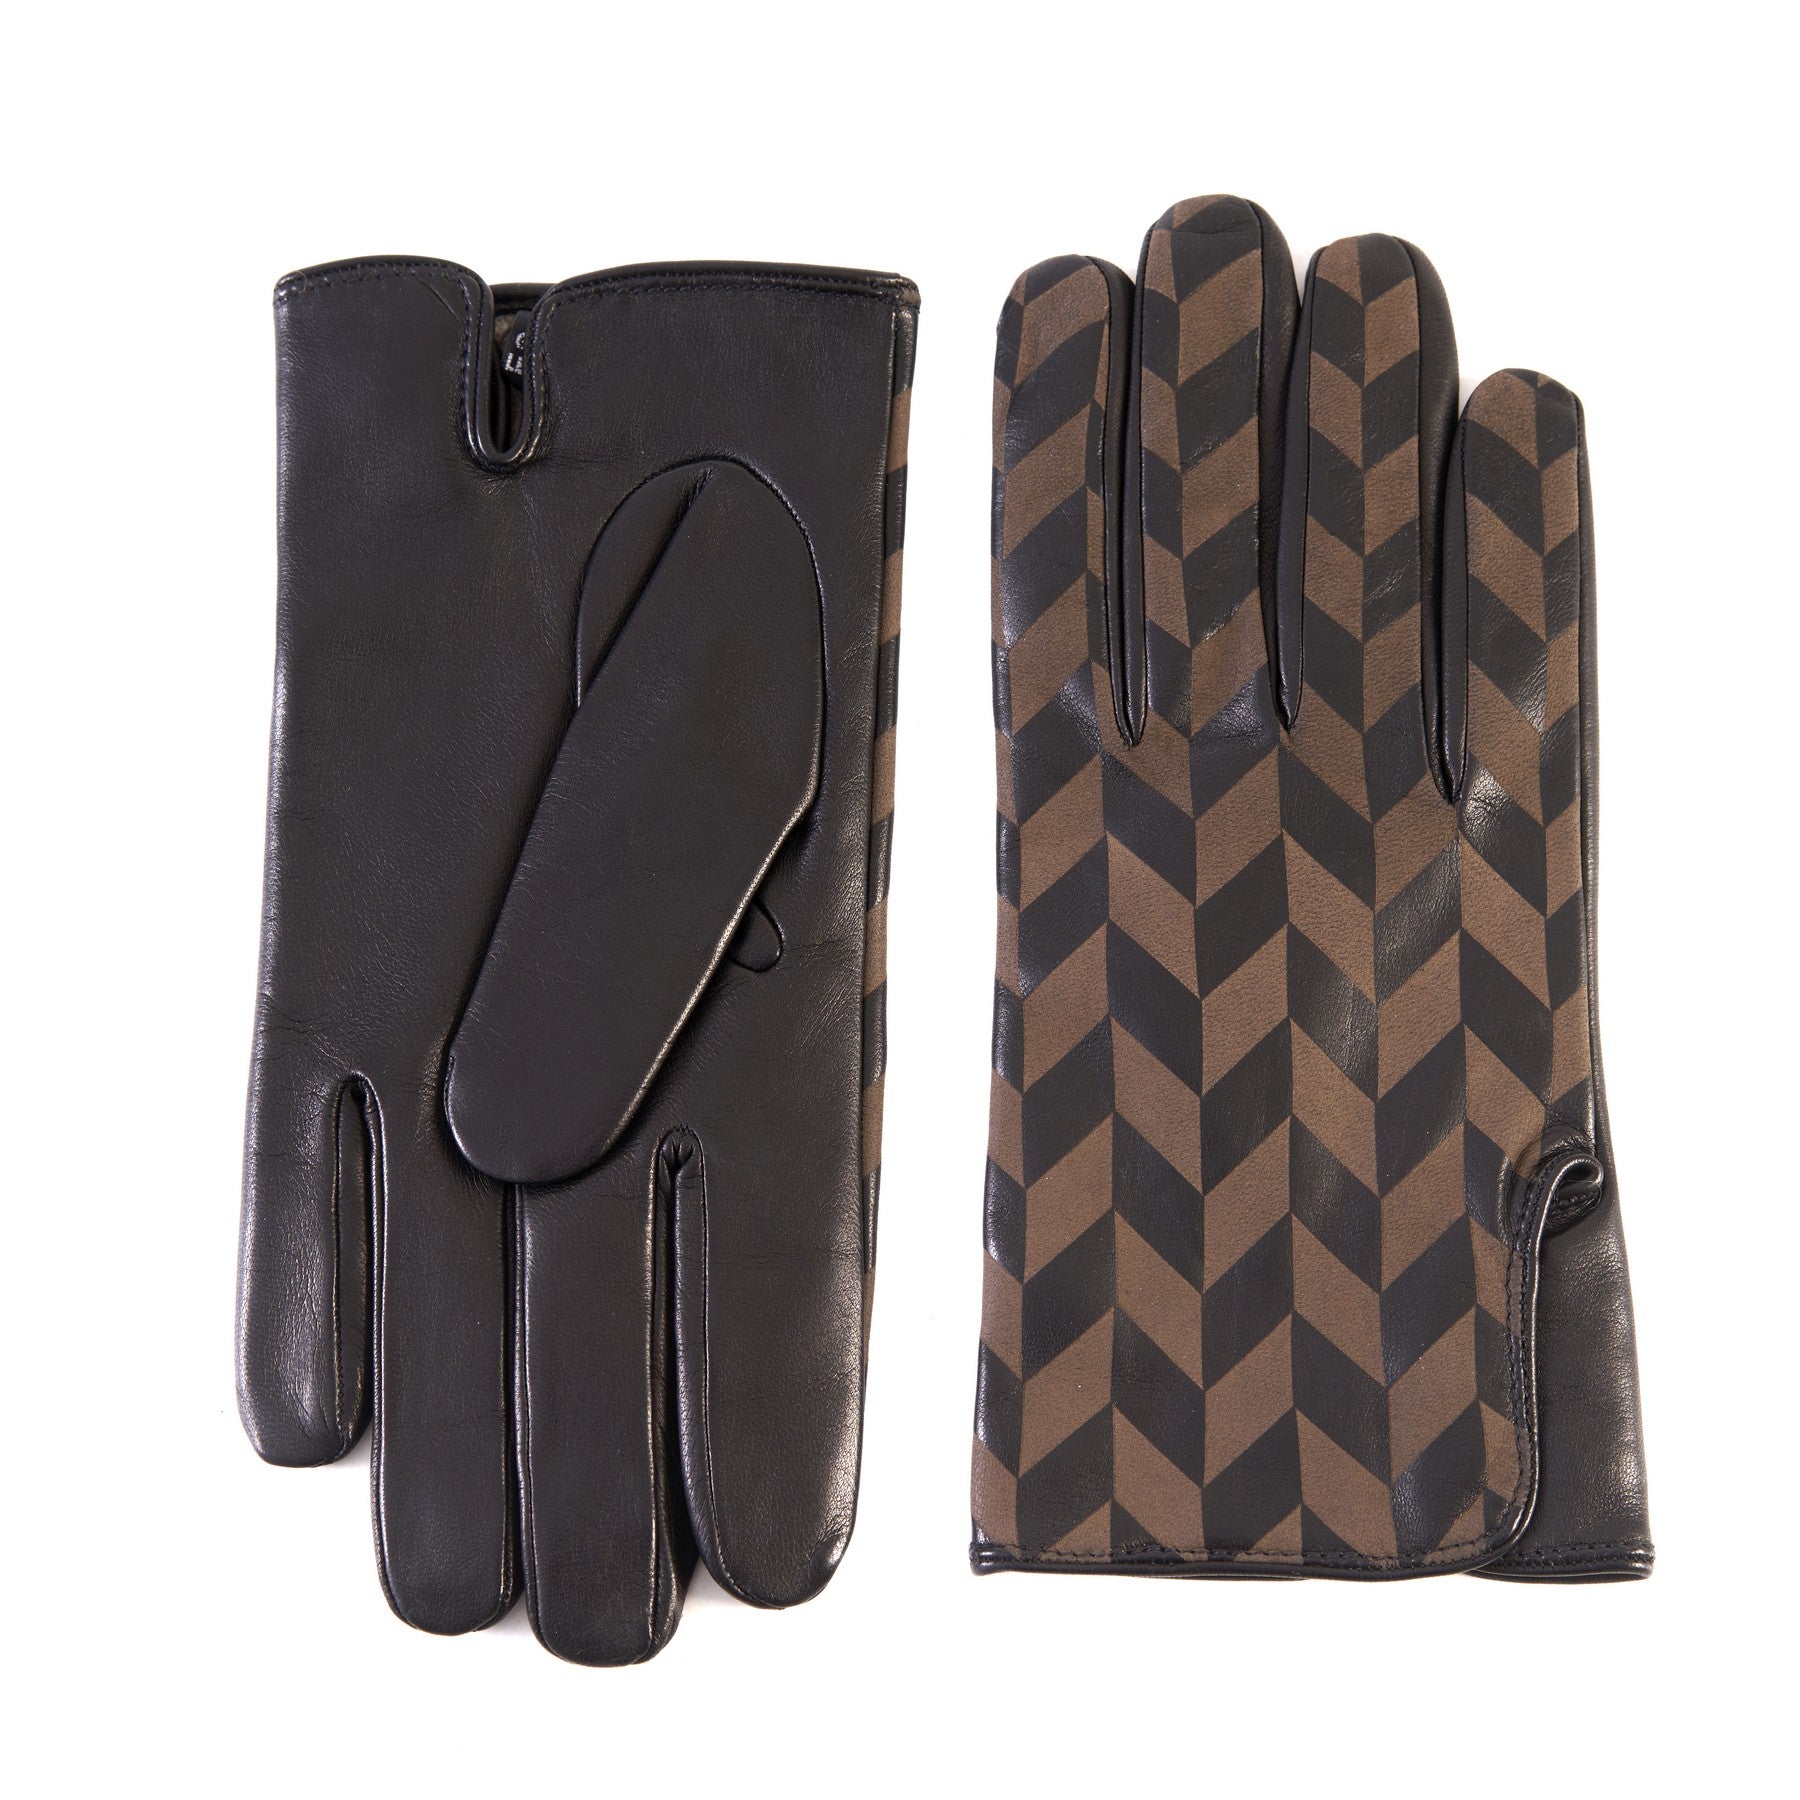 Men's black nappa leather gloves with laser-worked on the back palm opening and cashmere lining